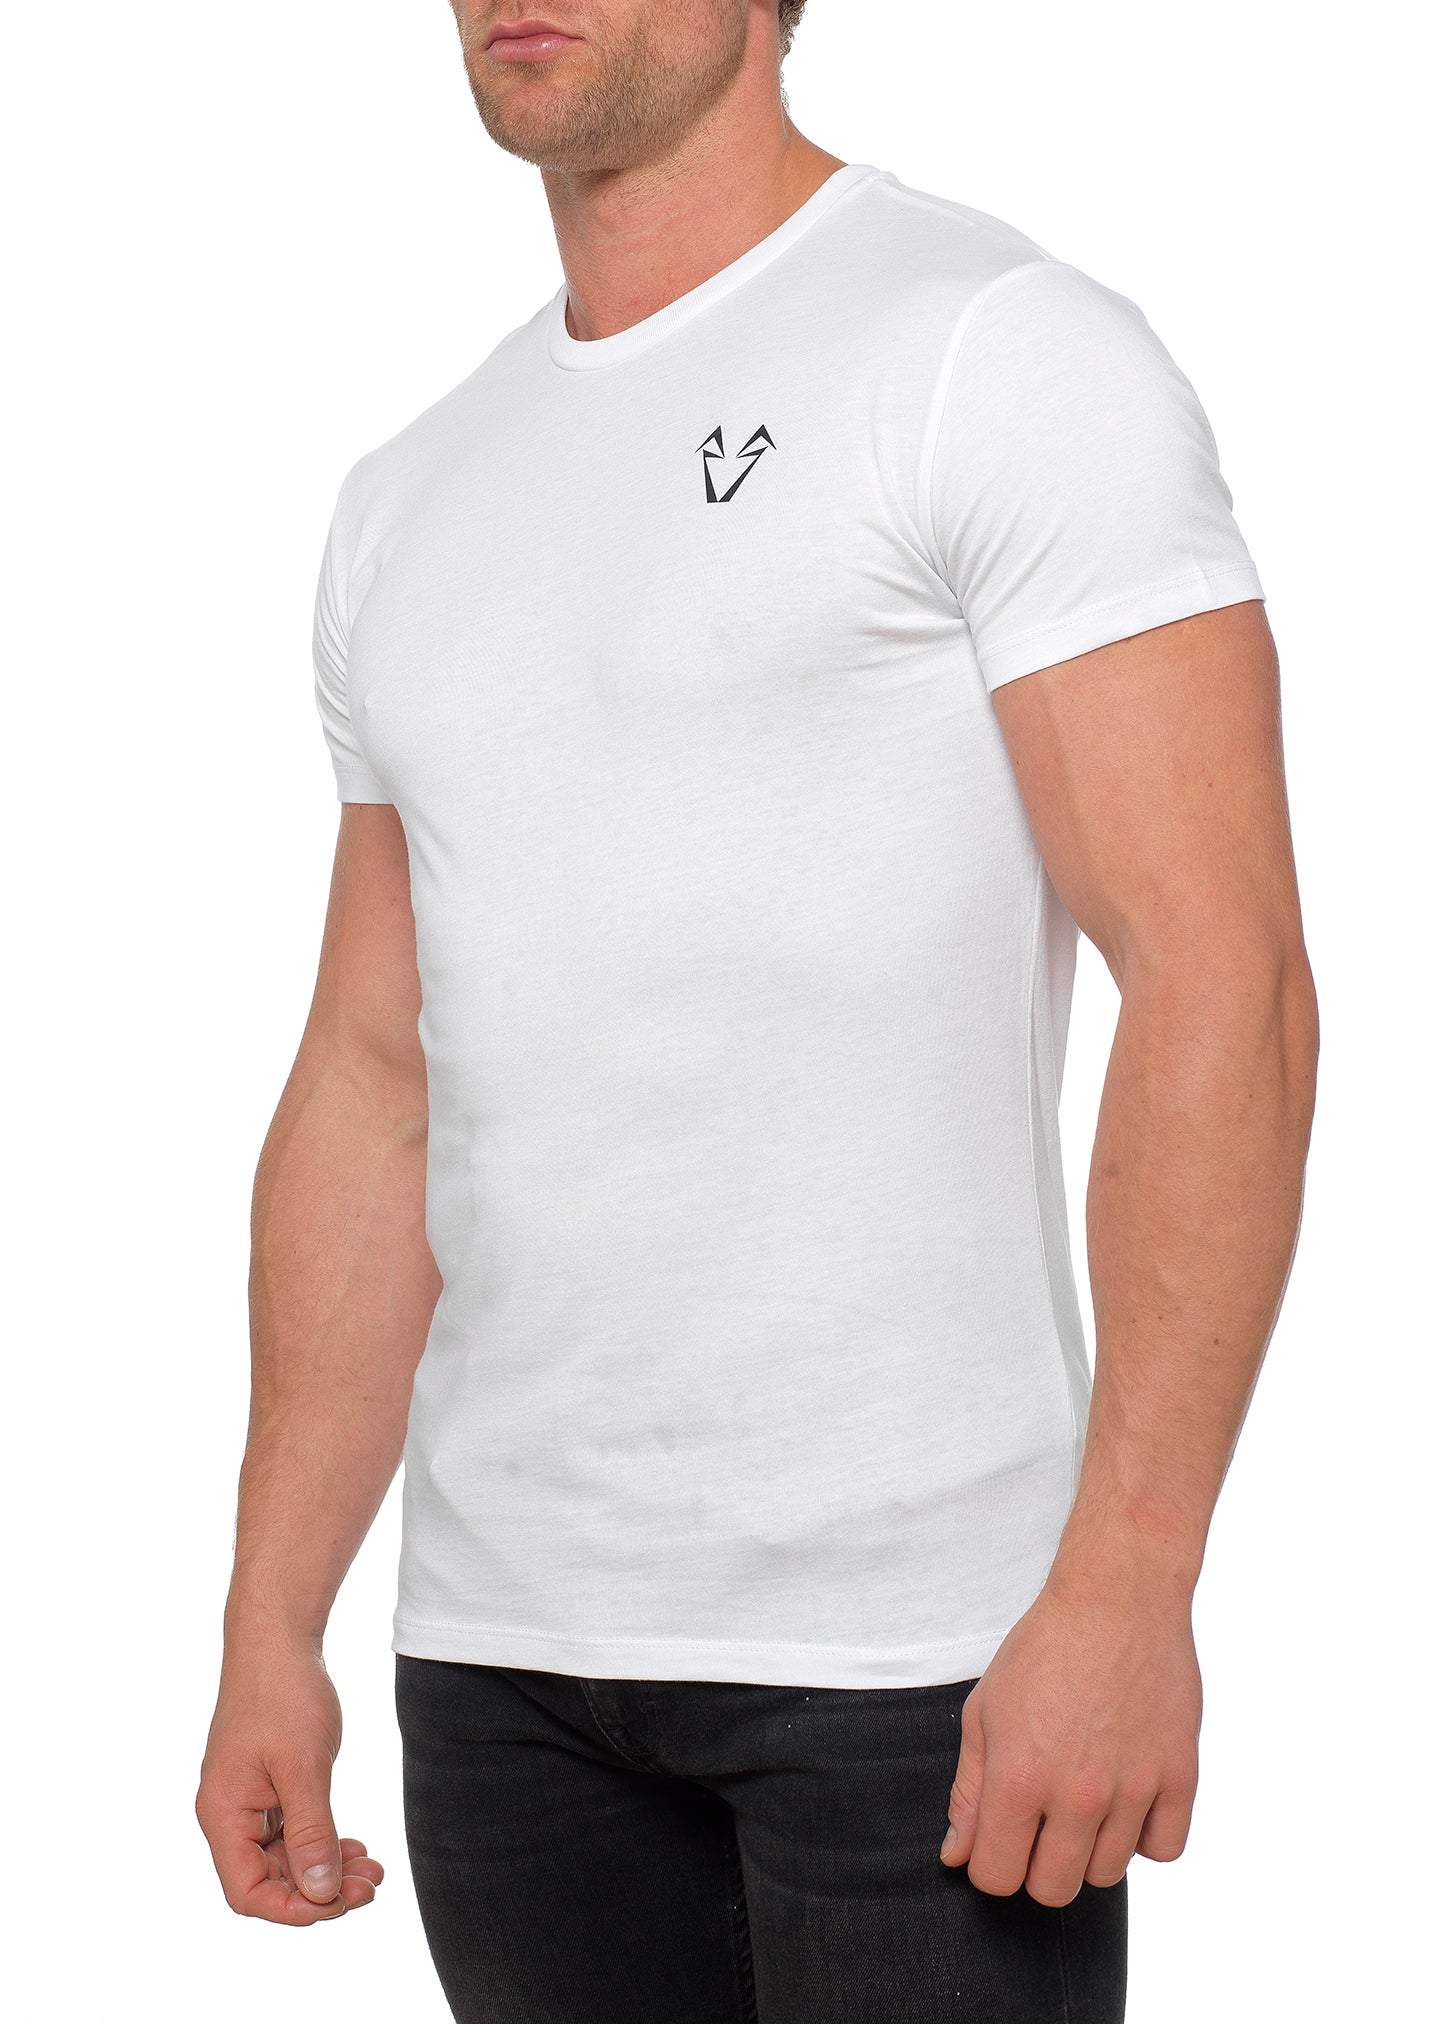 Mens Muscle Fit White T Shirt